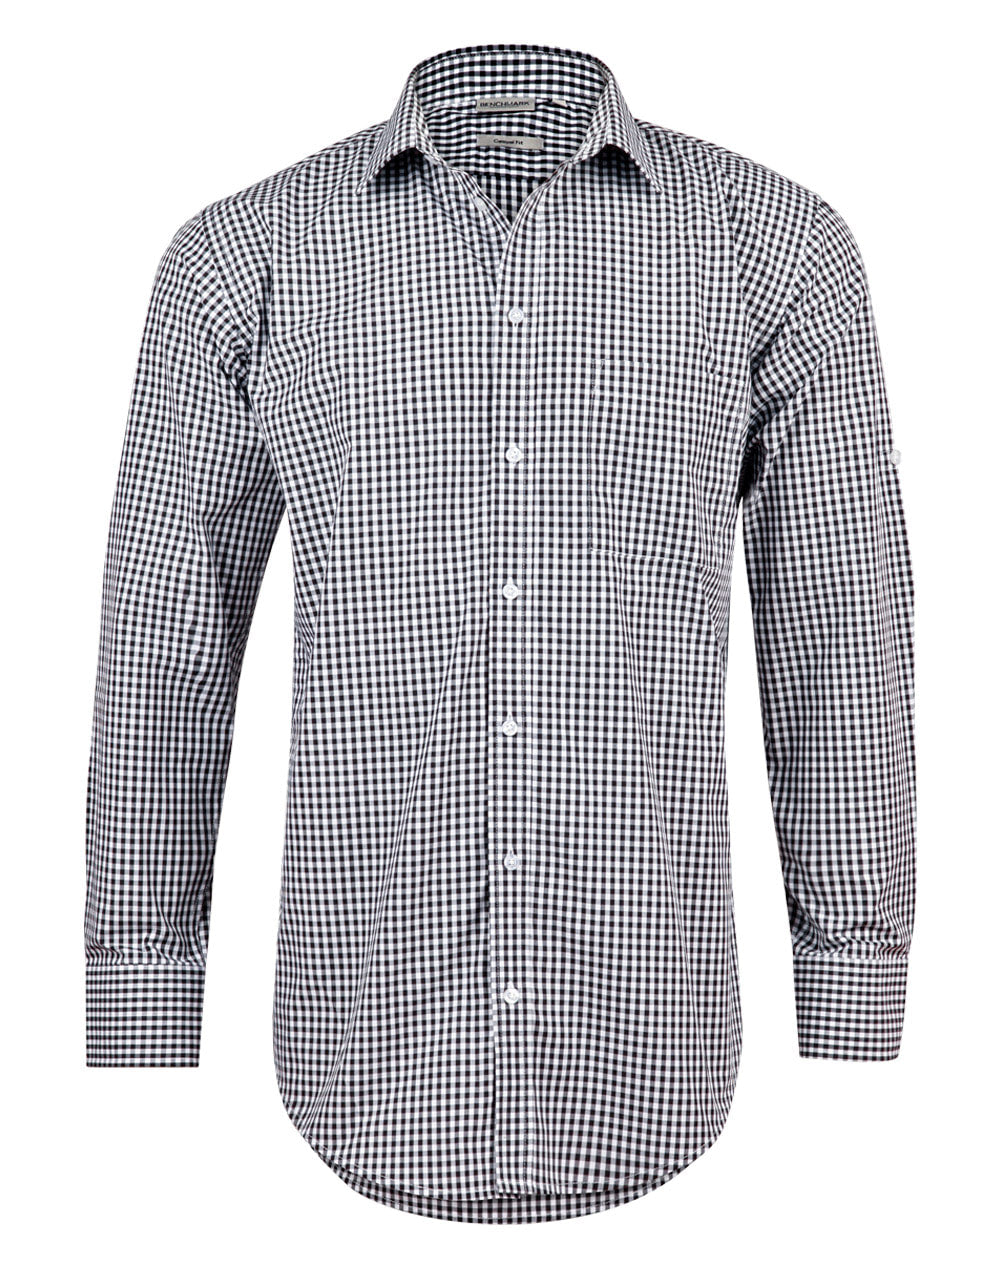 Benchmark M7300L Men’s Gingham Check Long Sleeve Shirt with Roll-up Tab Sleeve